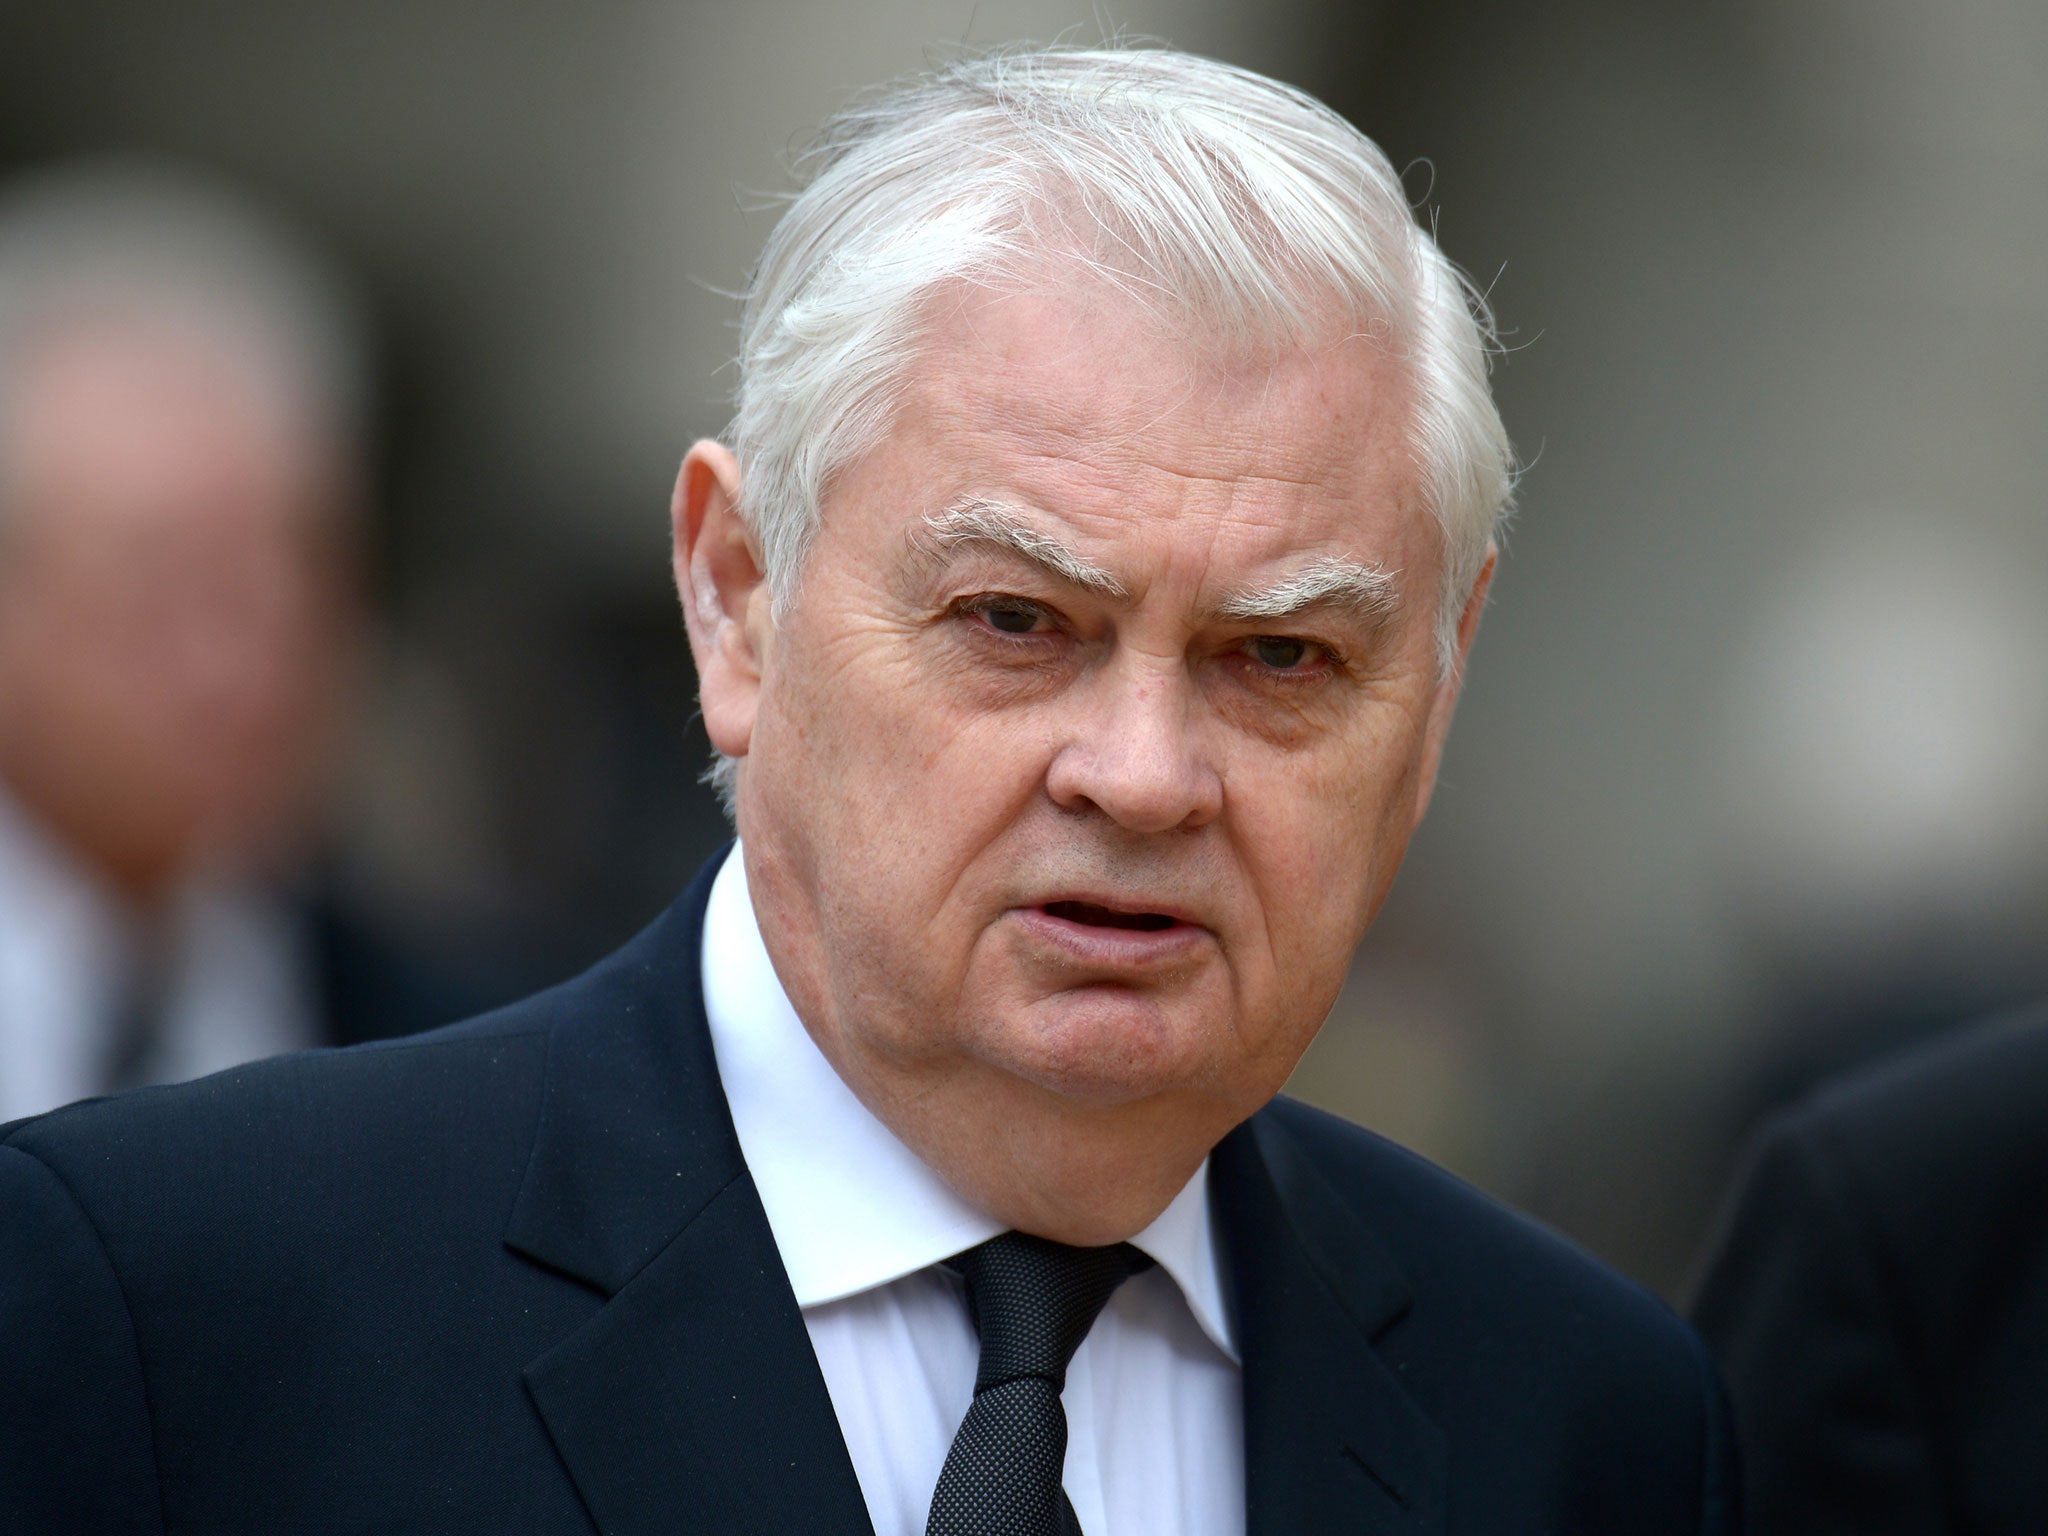 Lord Lamont was an adviser to the private equity firm Merchantbridge that went into Iraq to do business deals after the US invasion